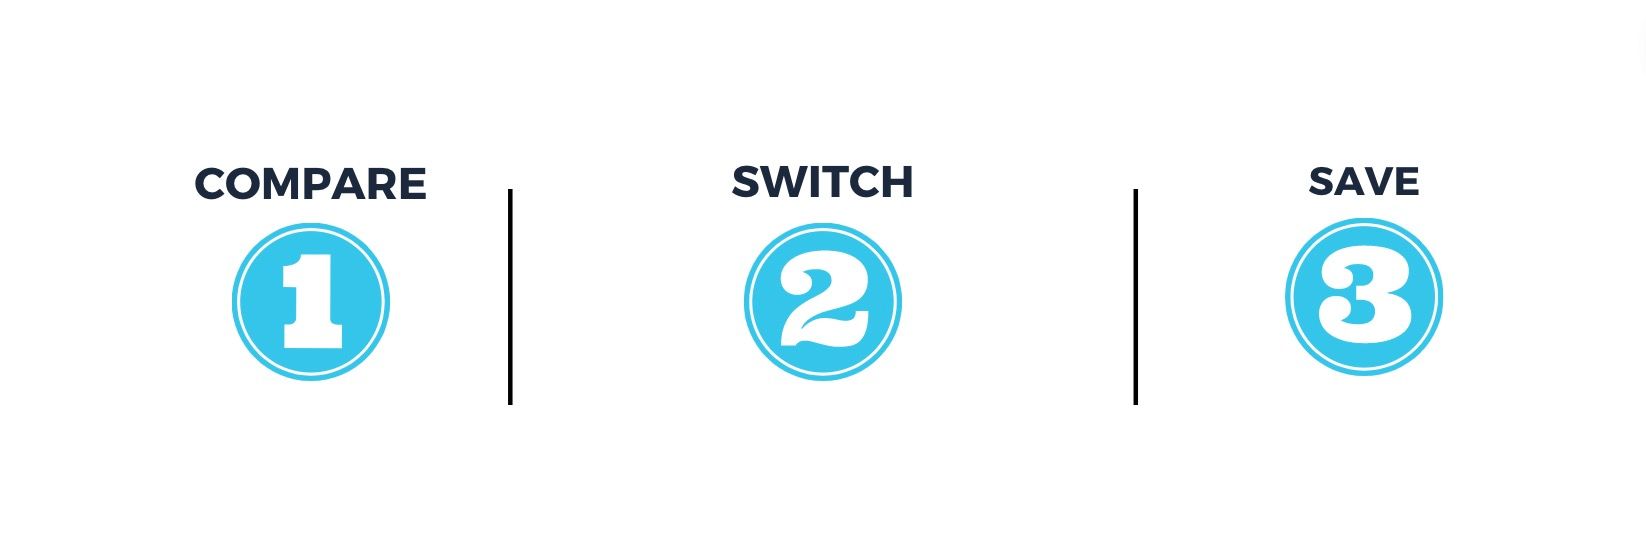 switch energy supplier in Cleveland ohio